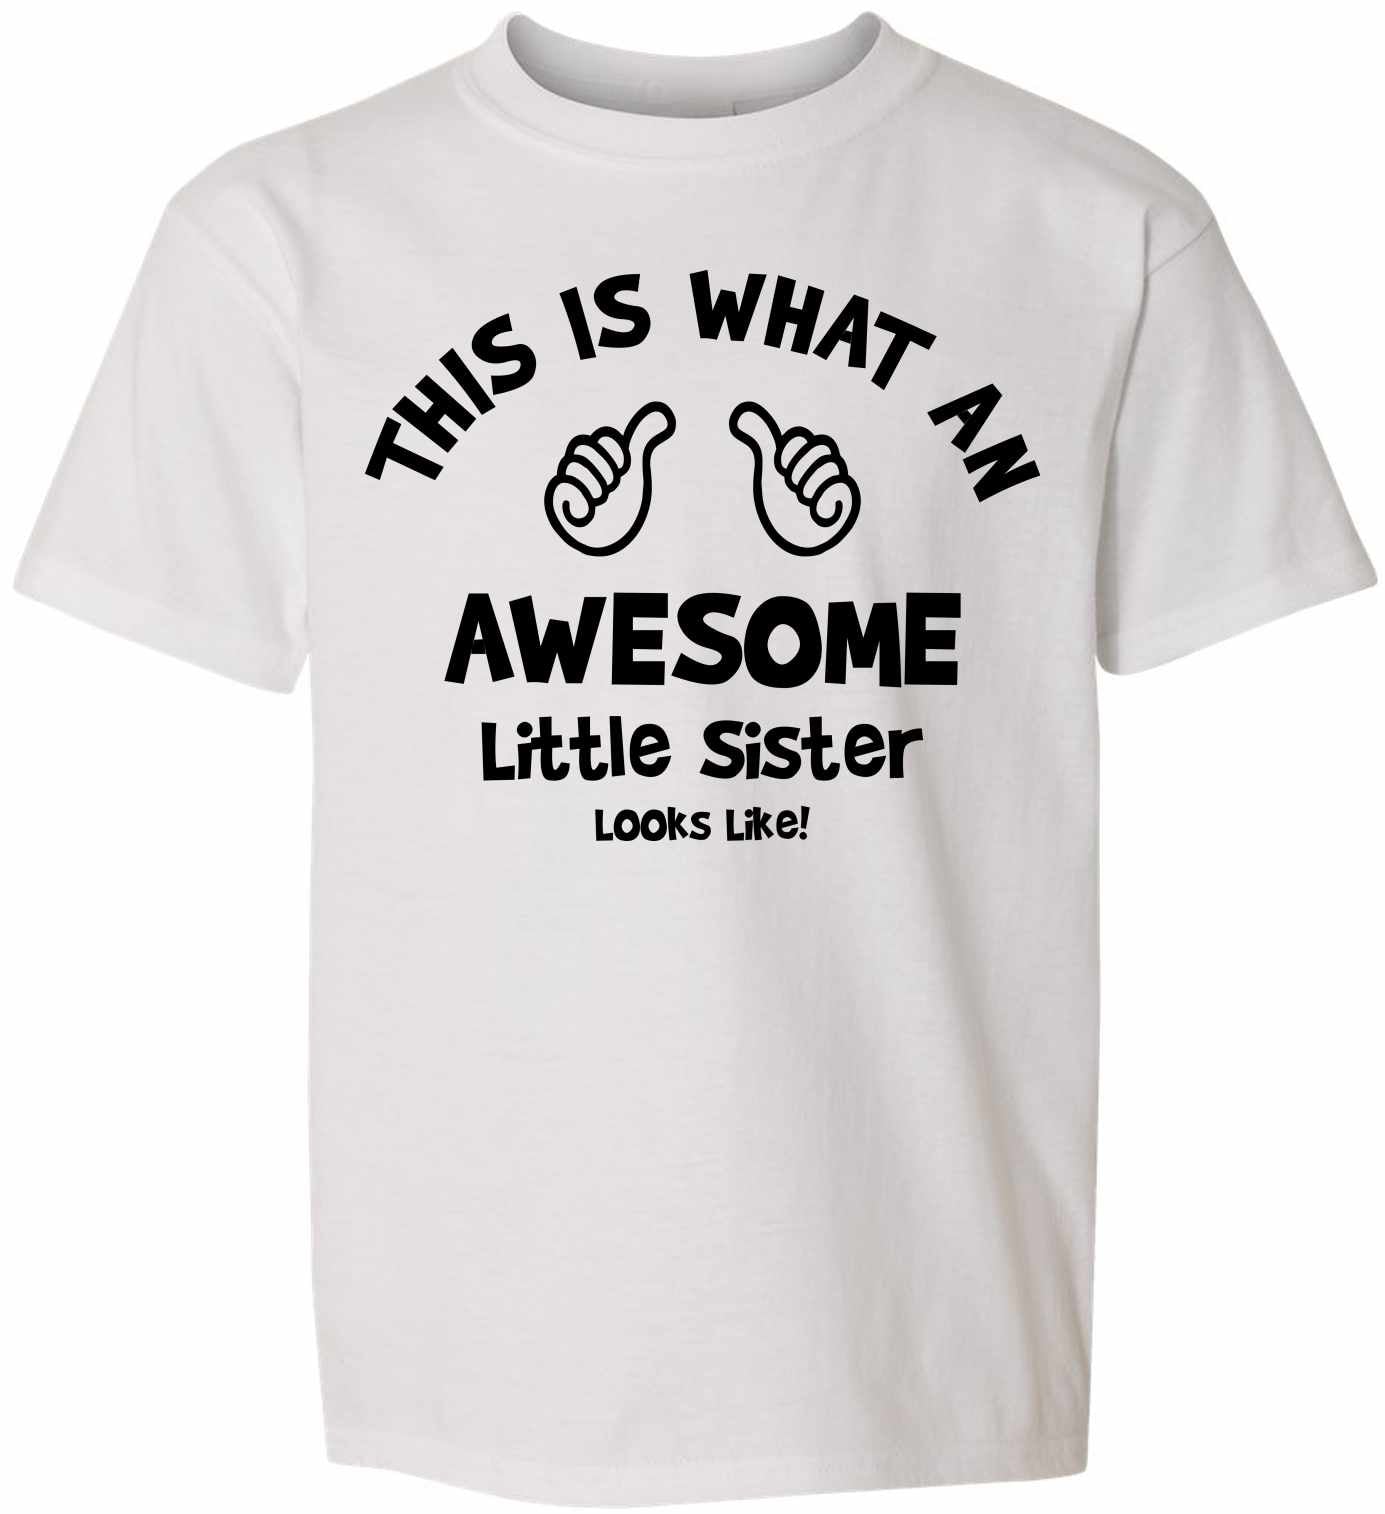 This is What an AWESOME LITTLE SISTER Looks Like on Kids T-Shirt